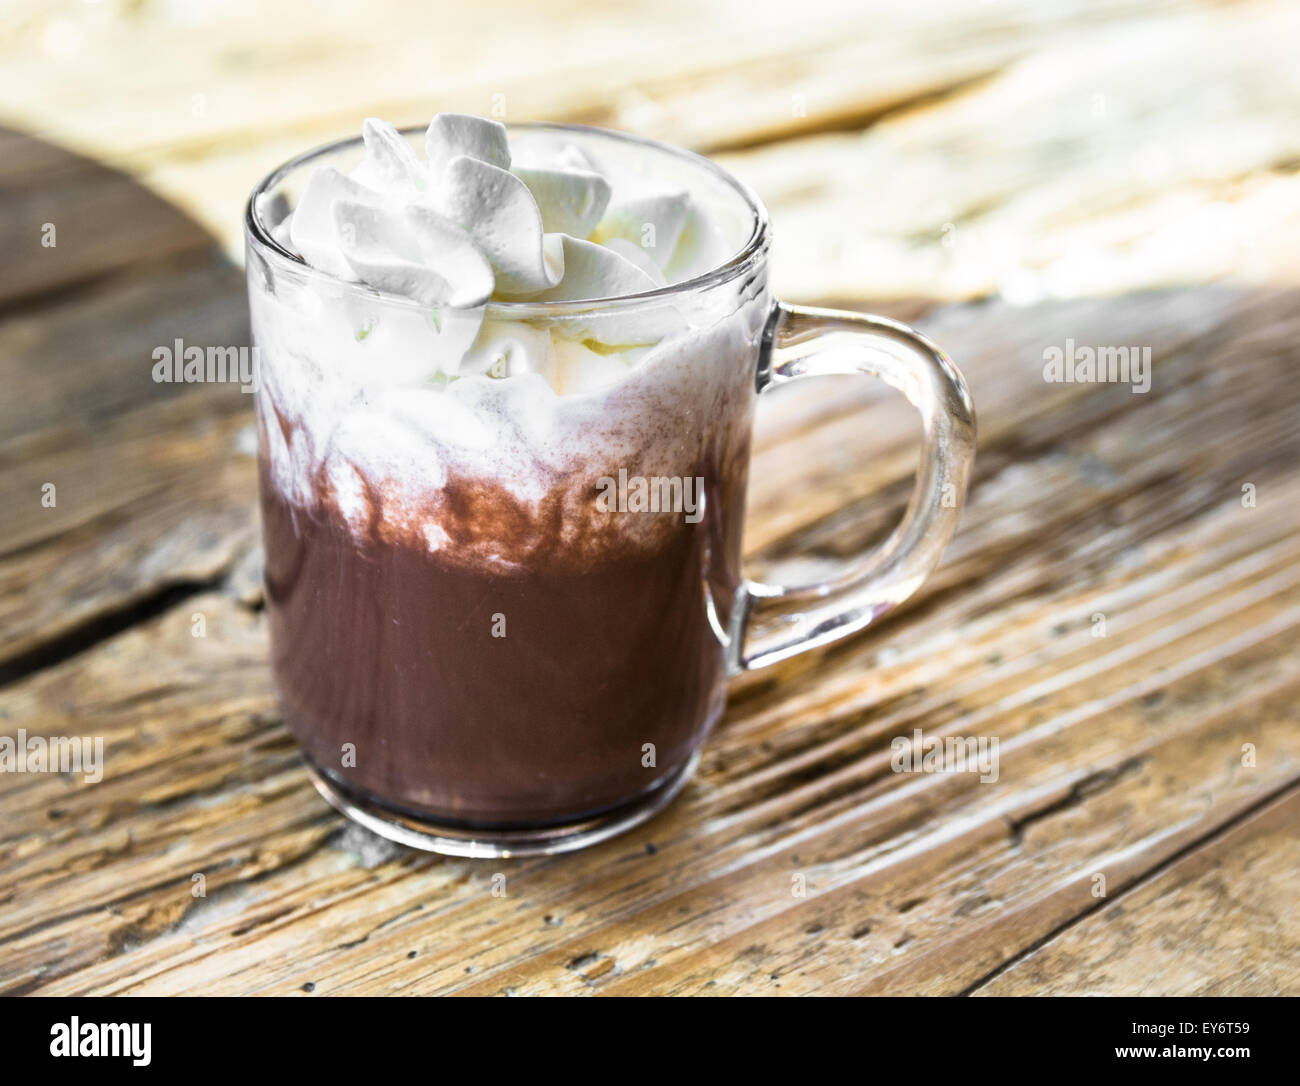 chocolate drink with whipped cream in transparent cup on rough wooden table Stock Photo